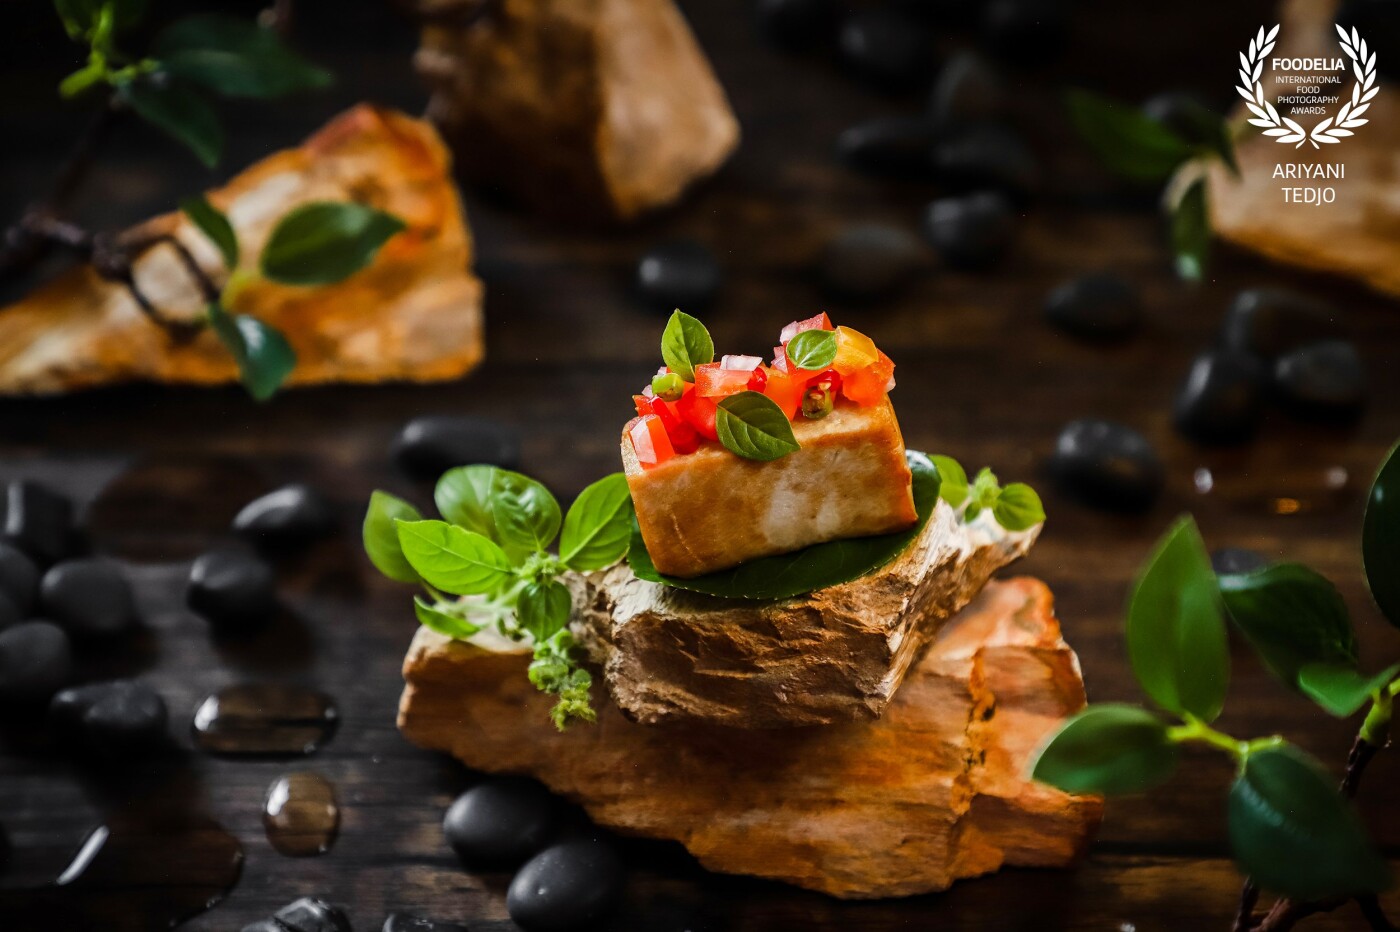 A traditional Indonesian / Manadonese dish goes fancy and a little wild. Seared tuna topped with Manado's signature salsa called Sambal Dabu-dabu. The dish is presented on a rock lined with plum aralia leaf and garnished with local basil leaves.